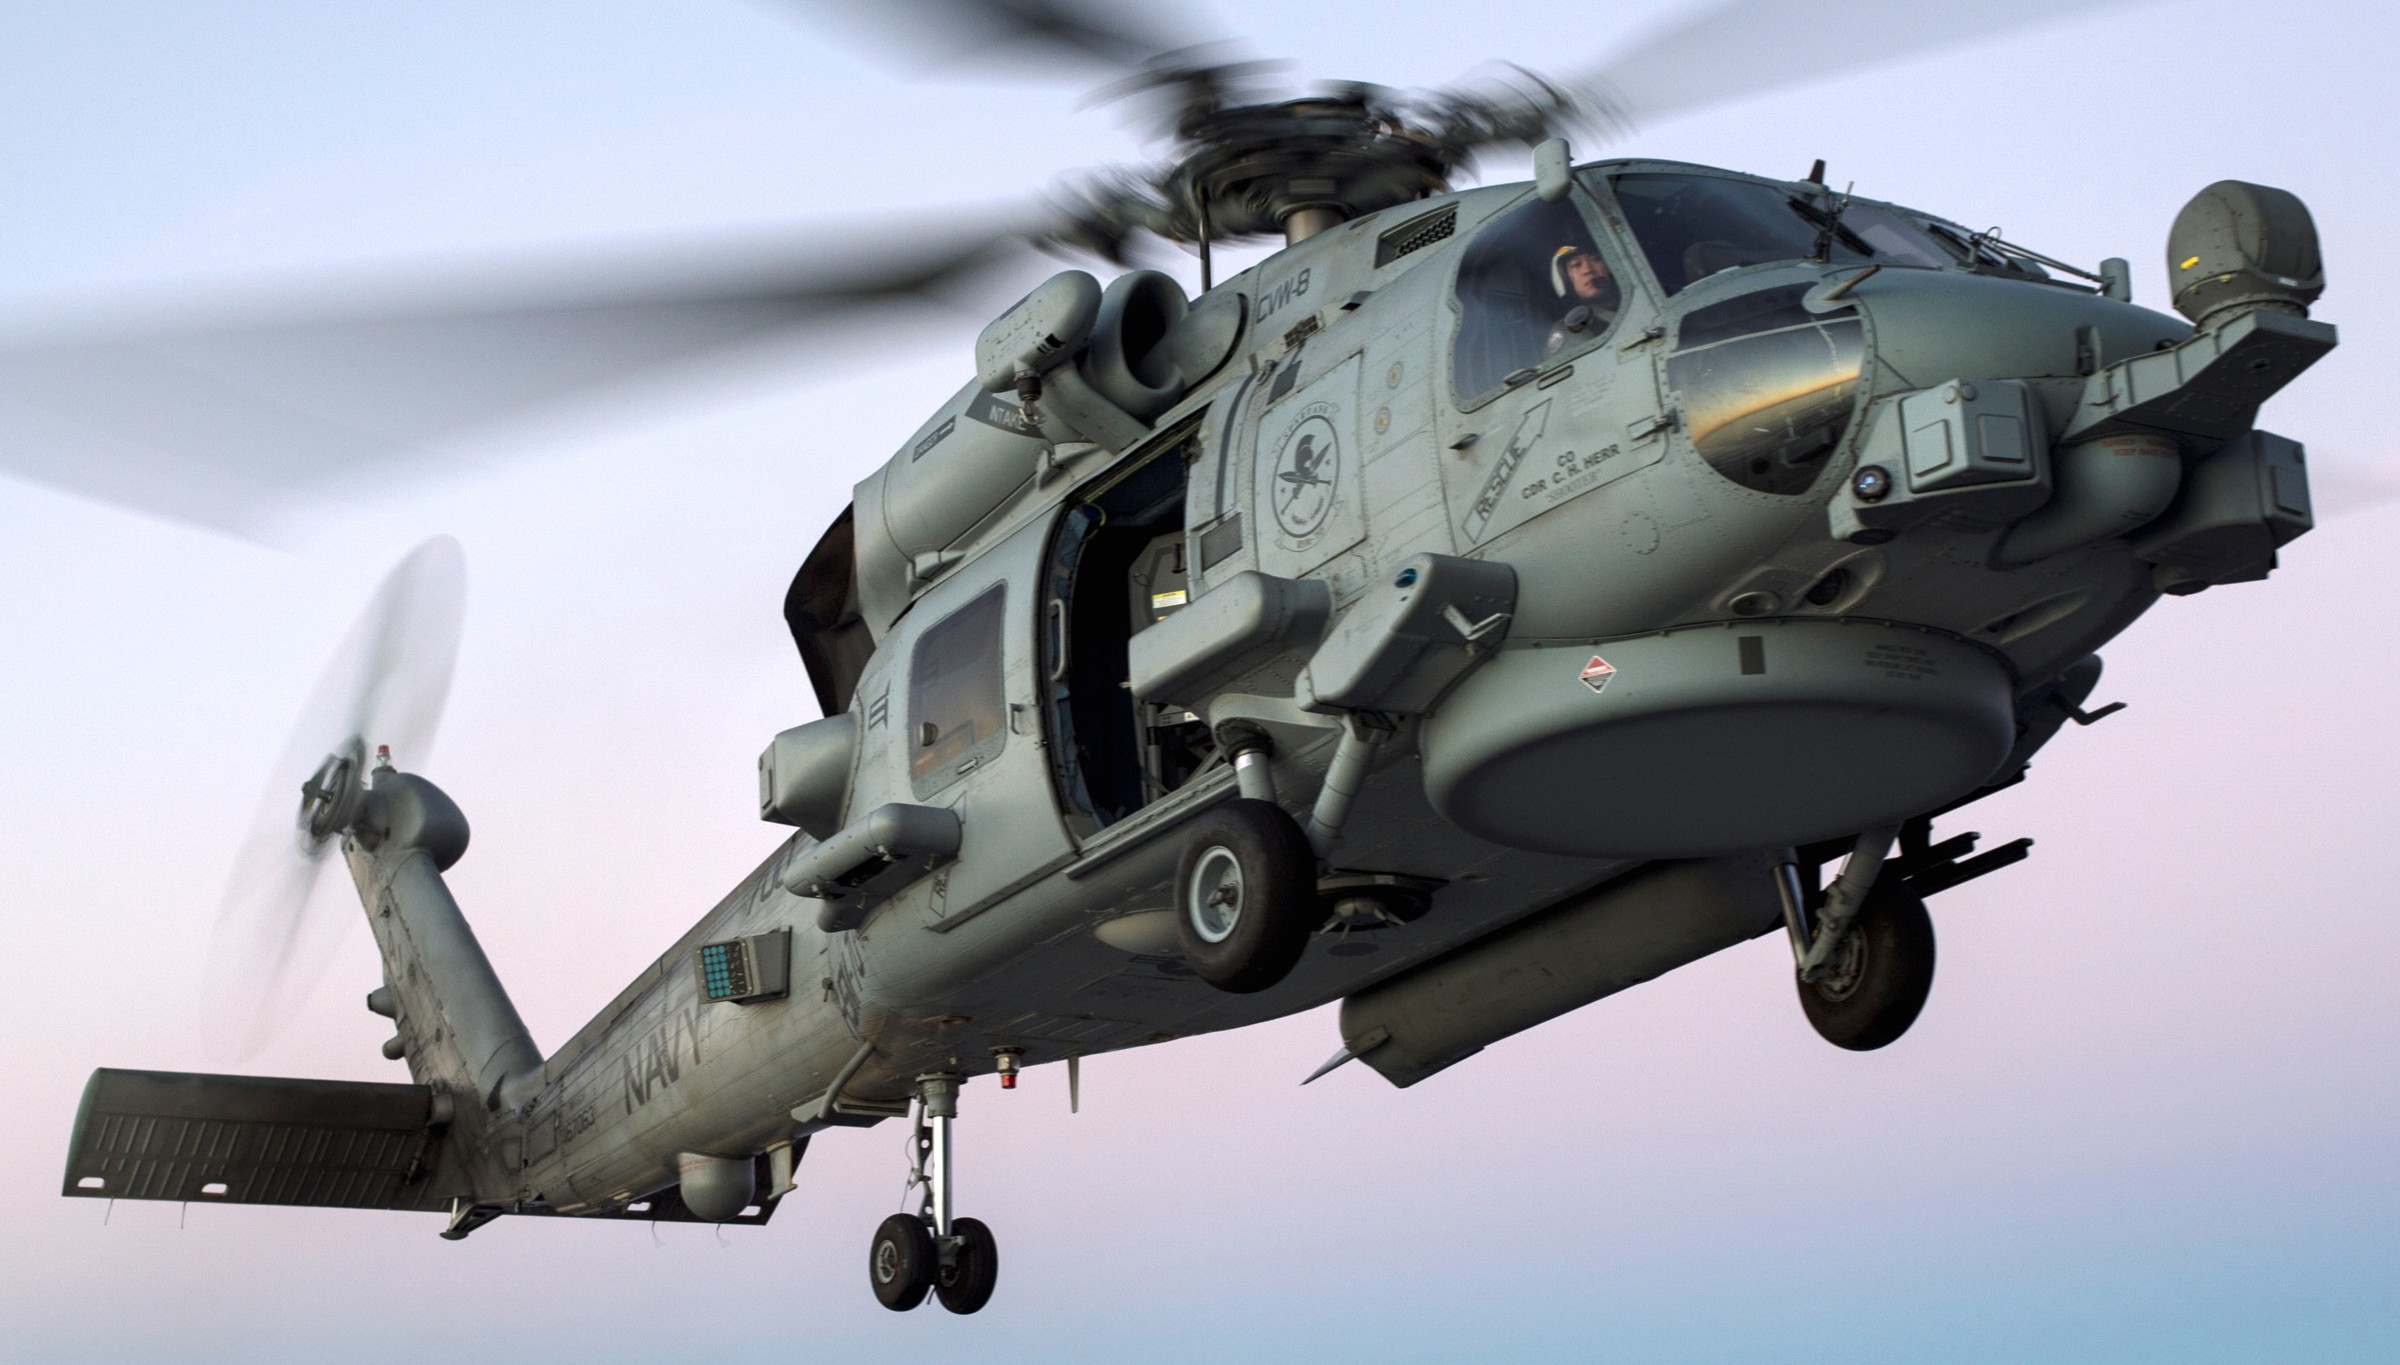 hsm-70 spartans helicopter maritime strike squadron mh-60r seahawk 2013 29